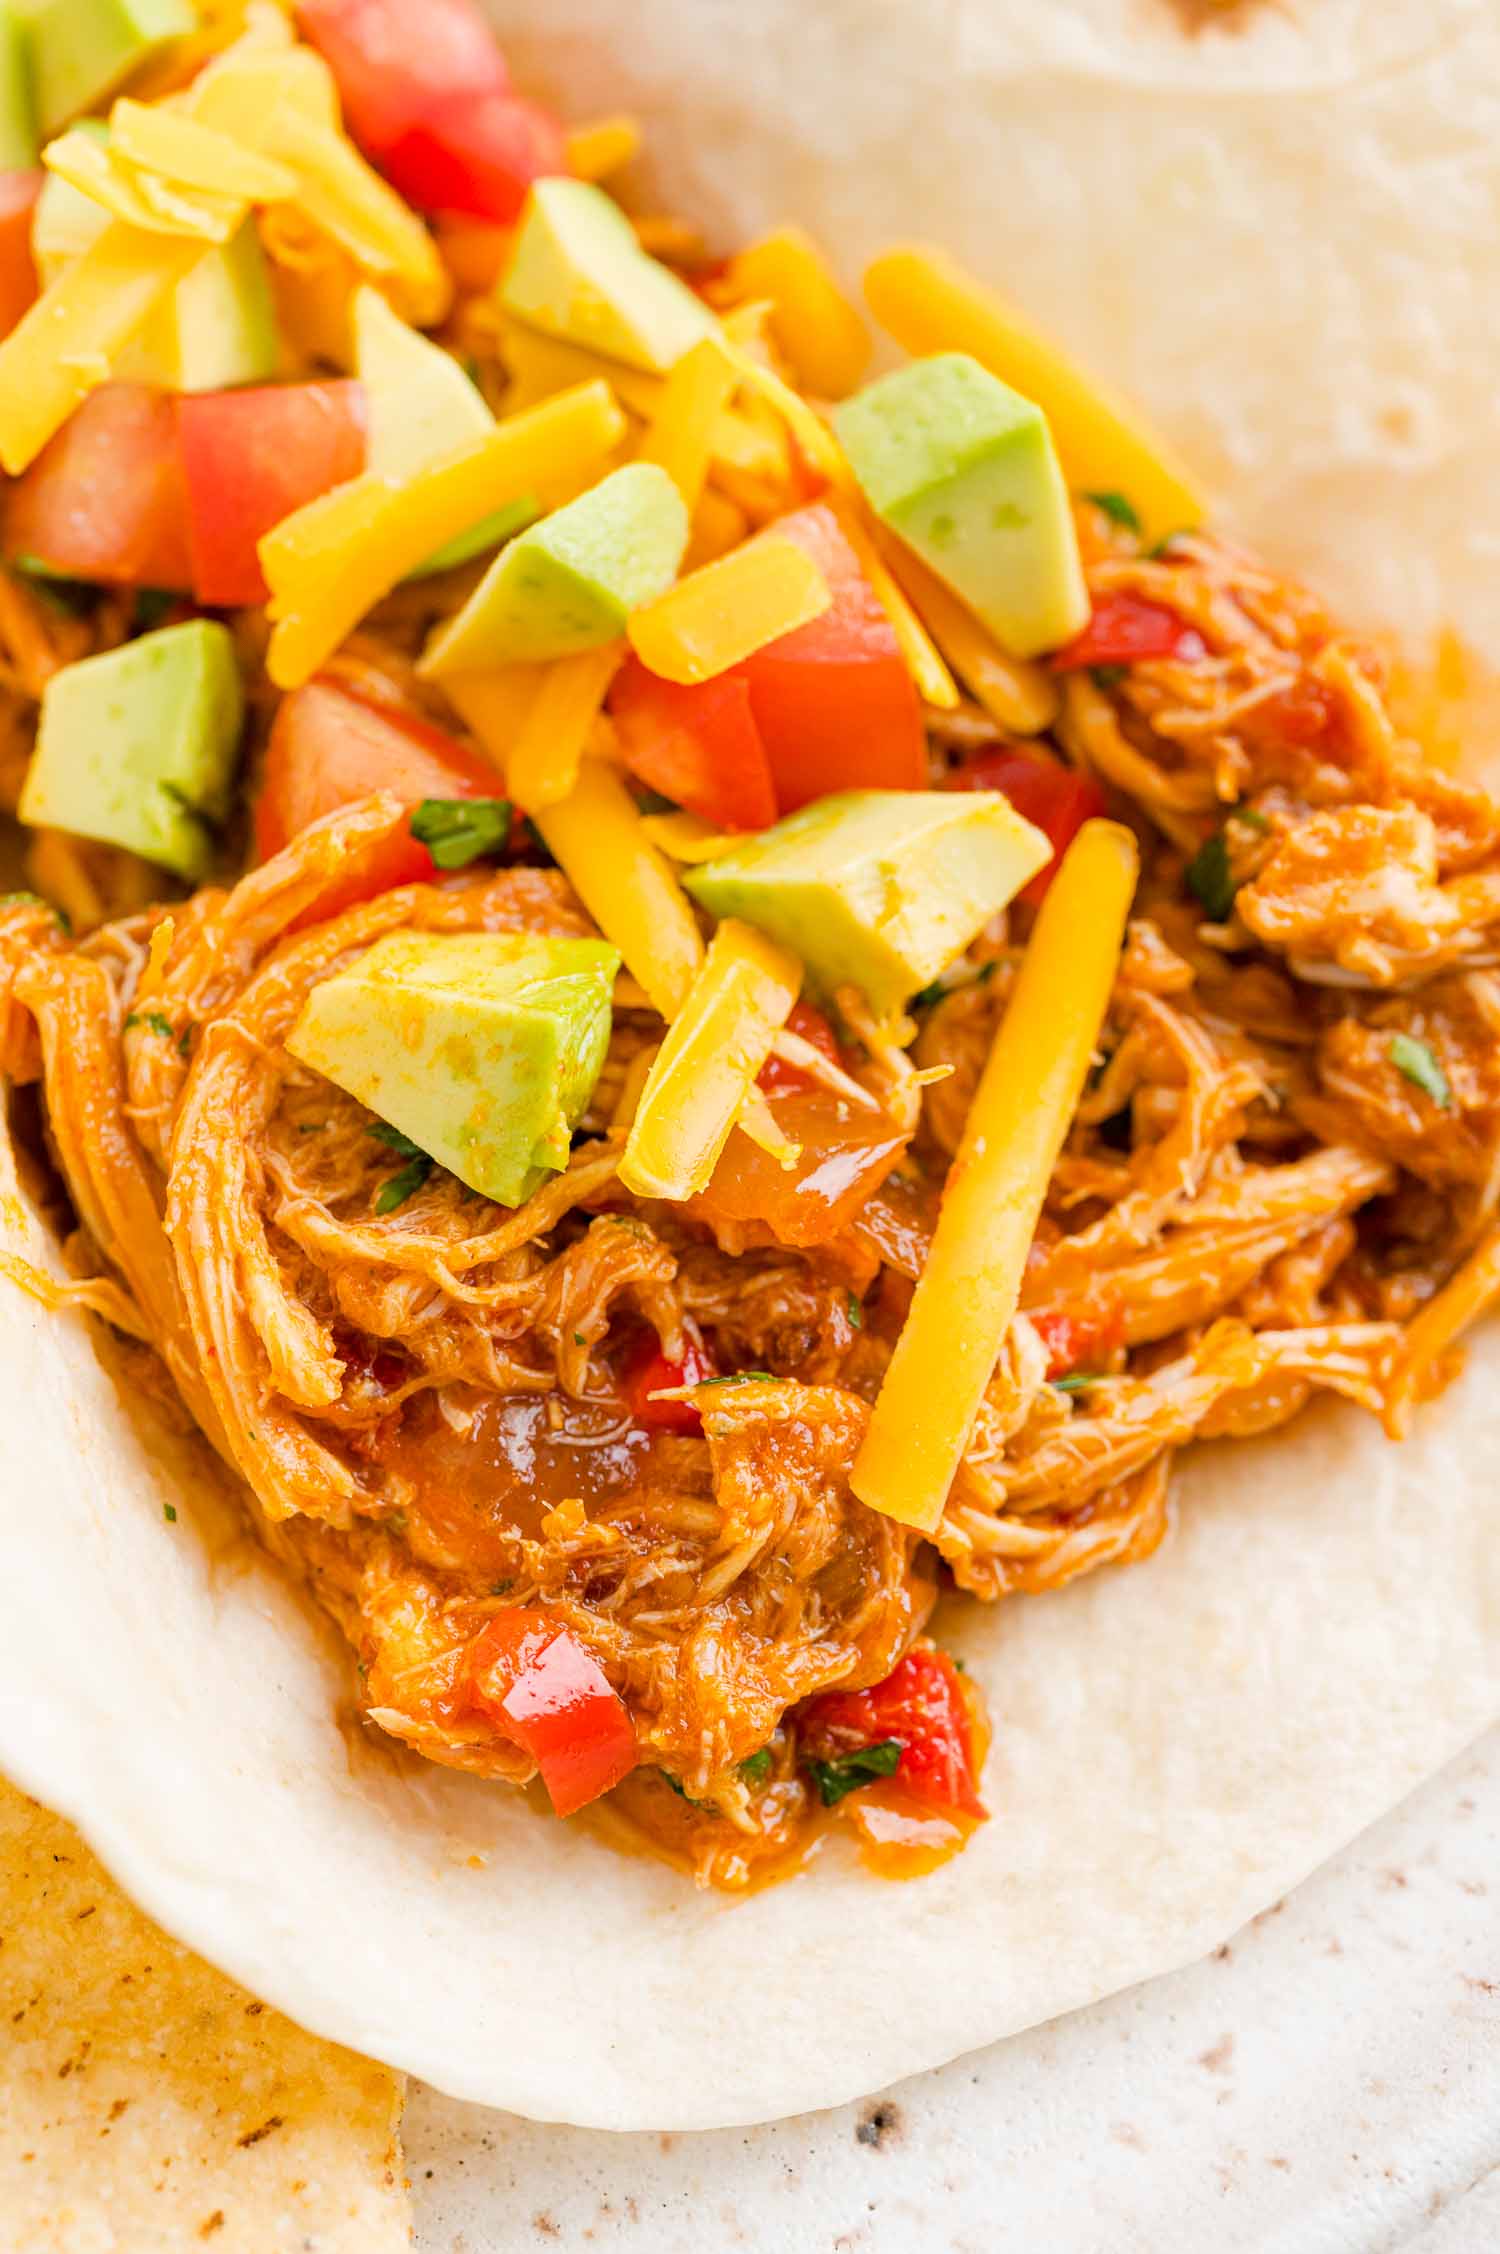 Crockpot salsa chicken served inside a flour tortilla with diced avocado, tomatoes, and shredded cheese.